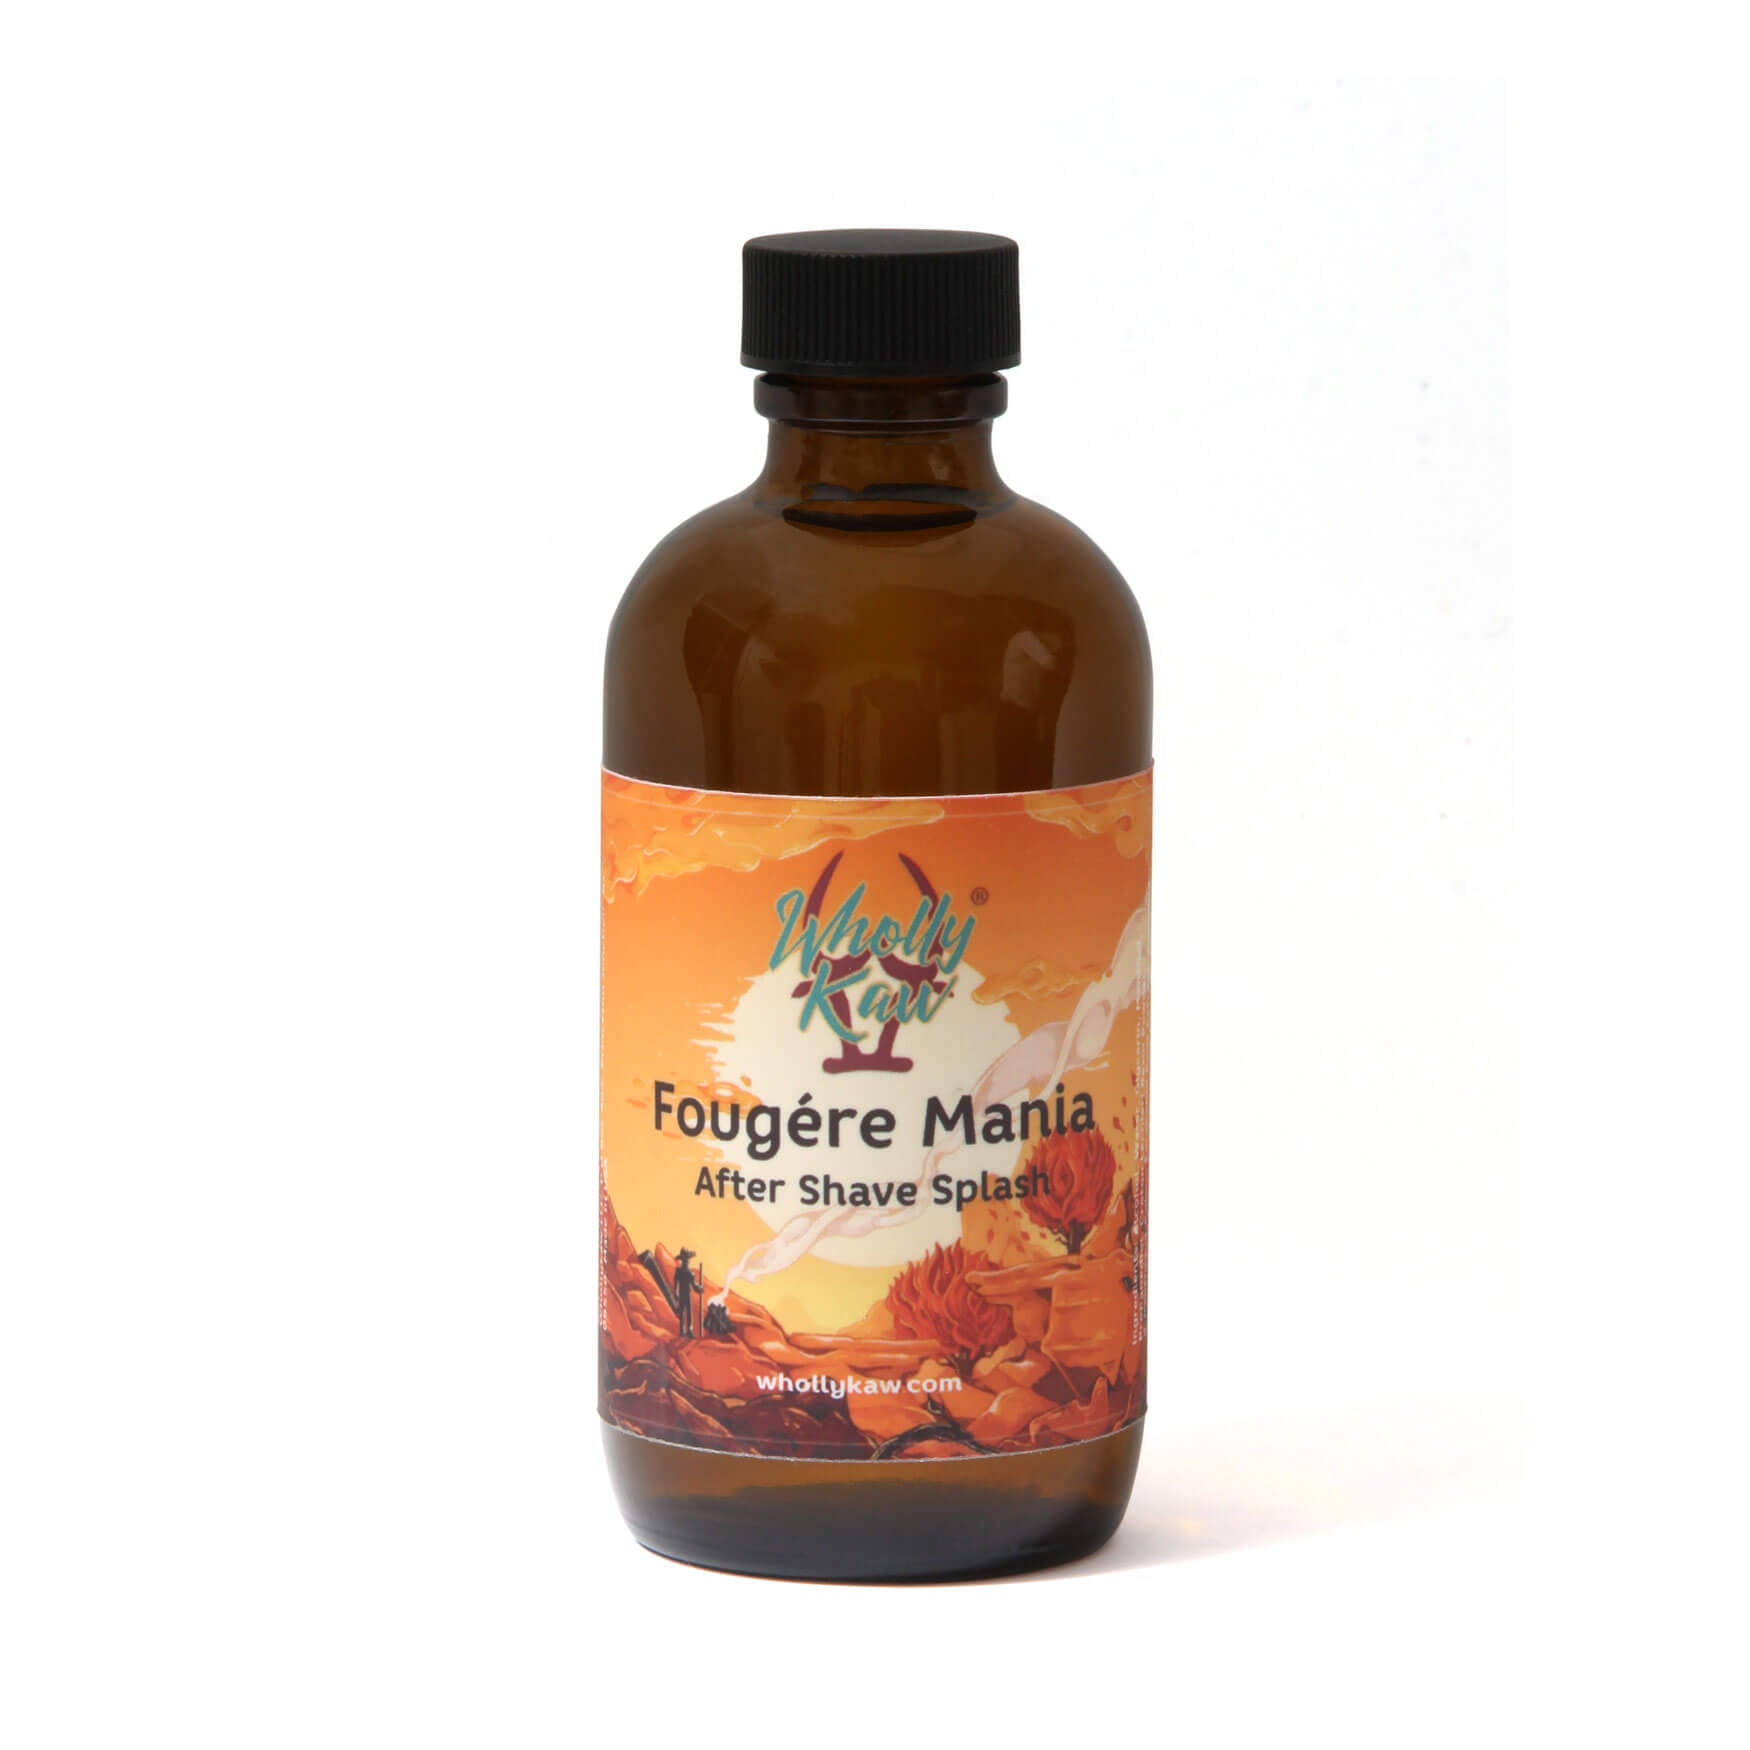 Wholly Kaw Fougere Mania Aftershave Splash